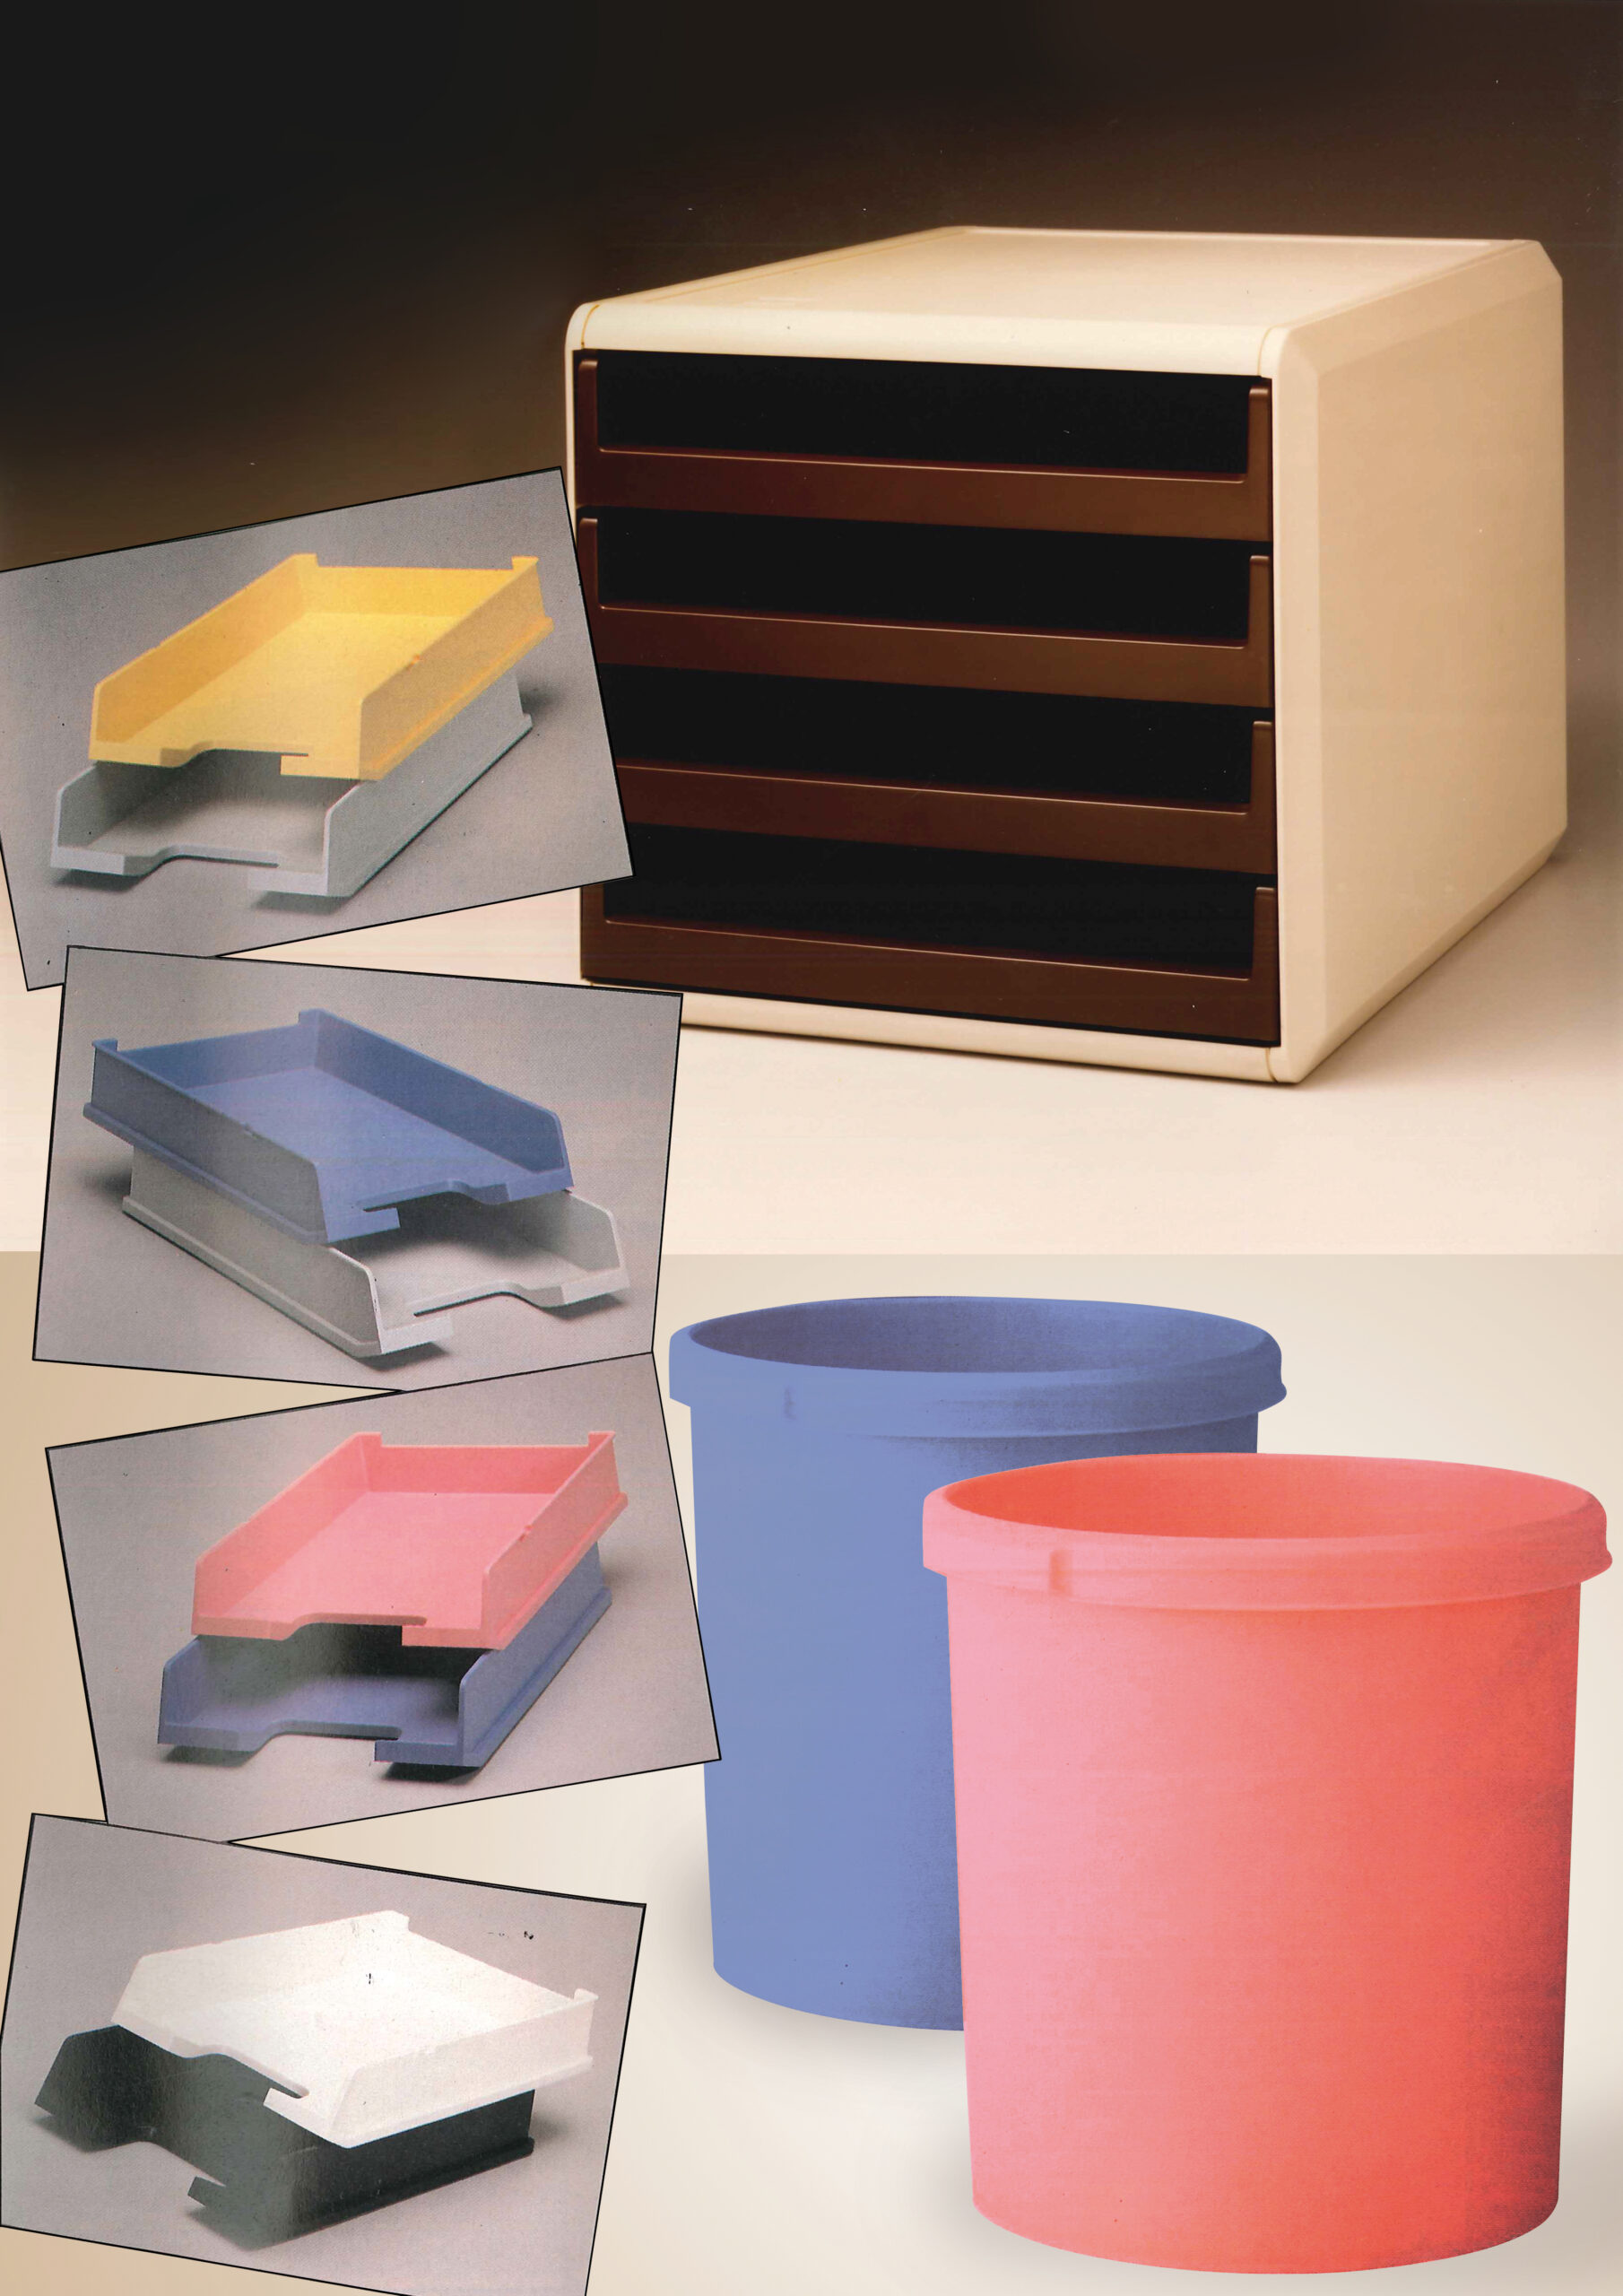 Letter trays, office sets and waste baskets